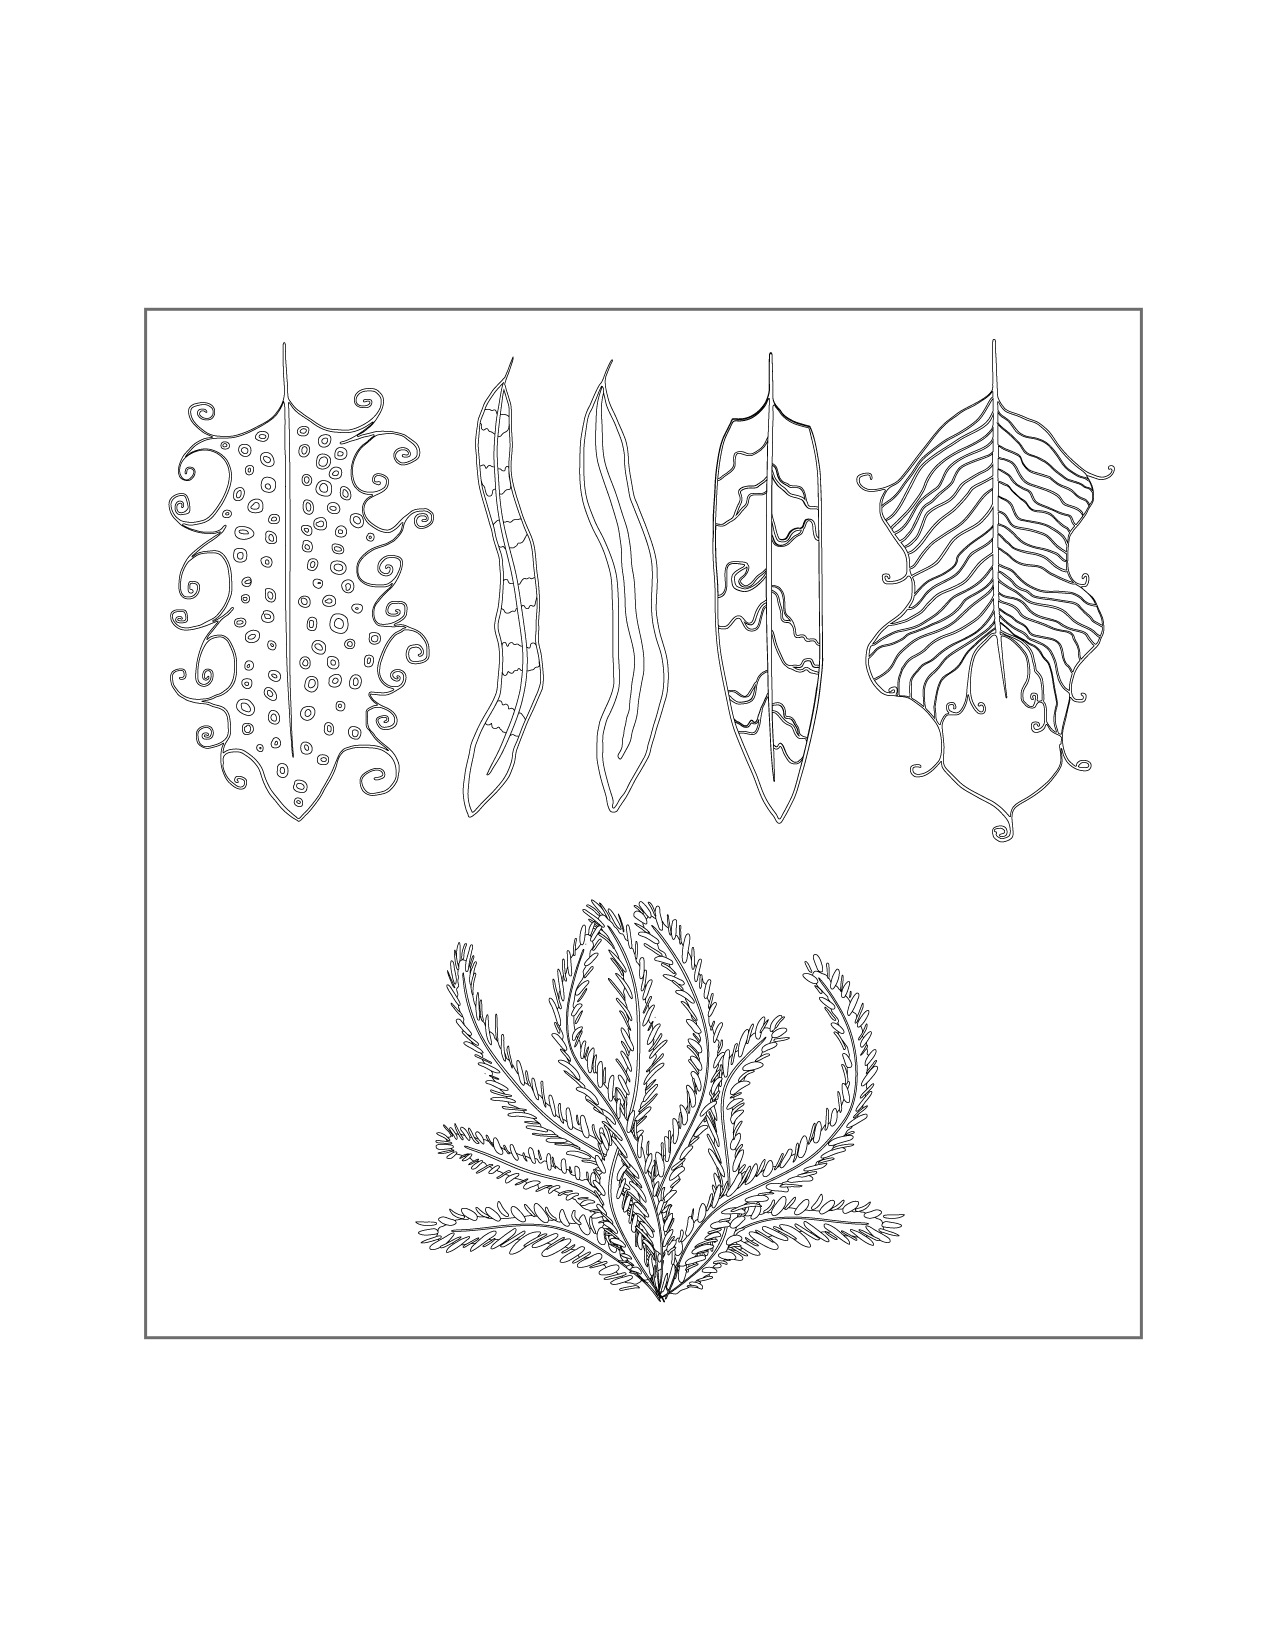 Variety Of Feathers Coloring Page